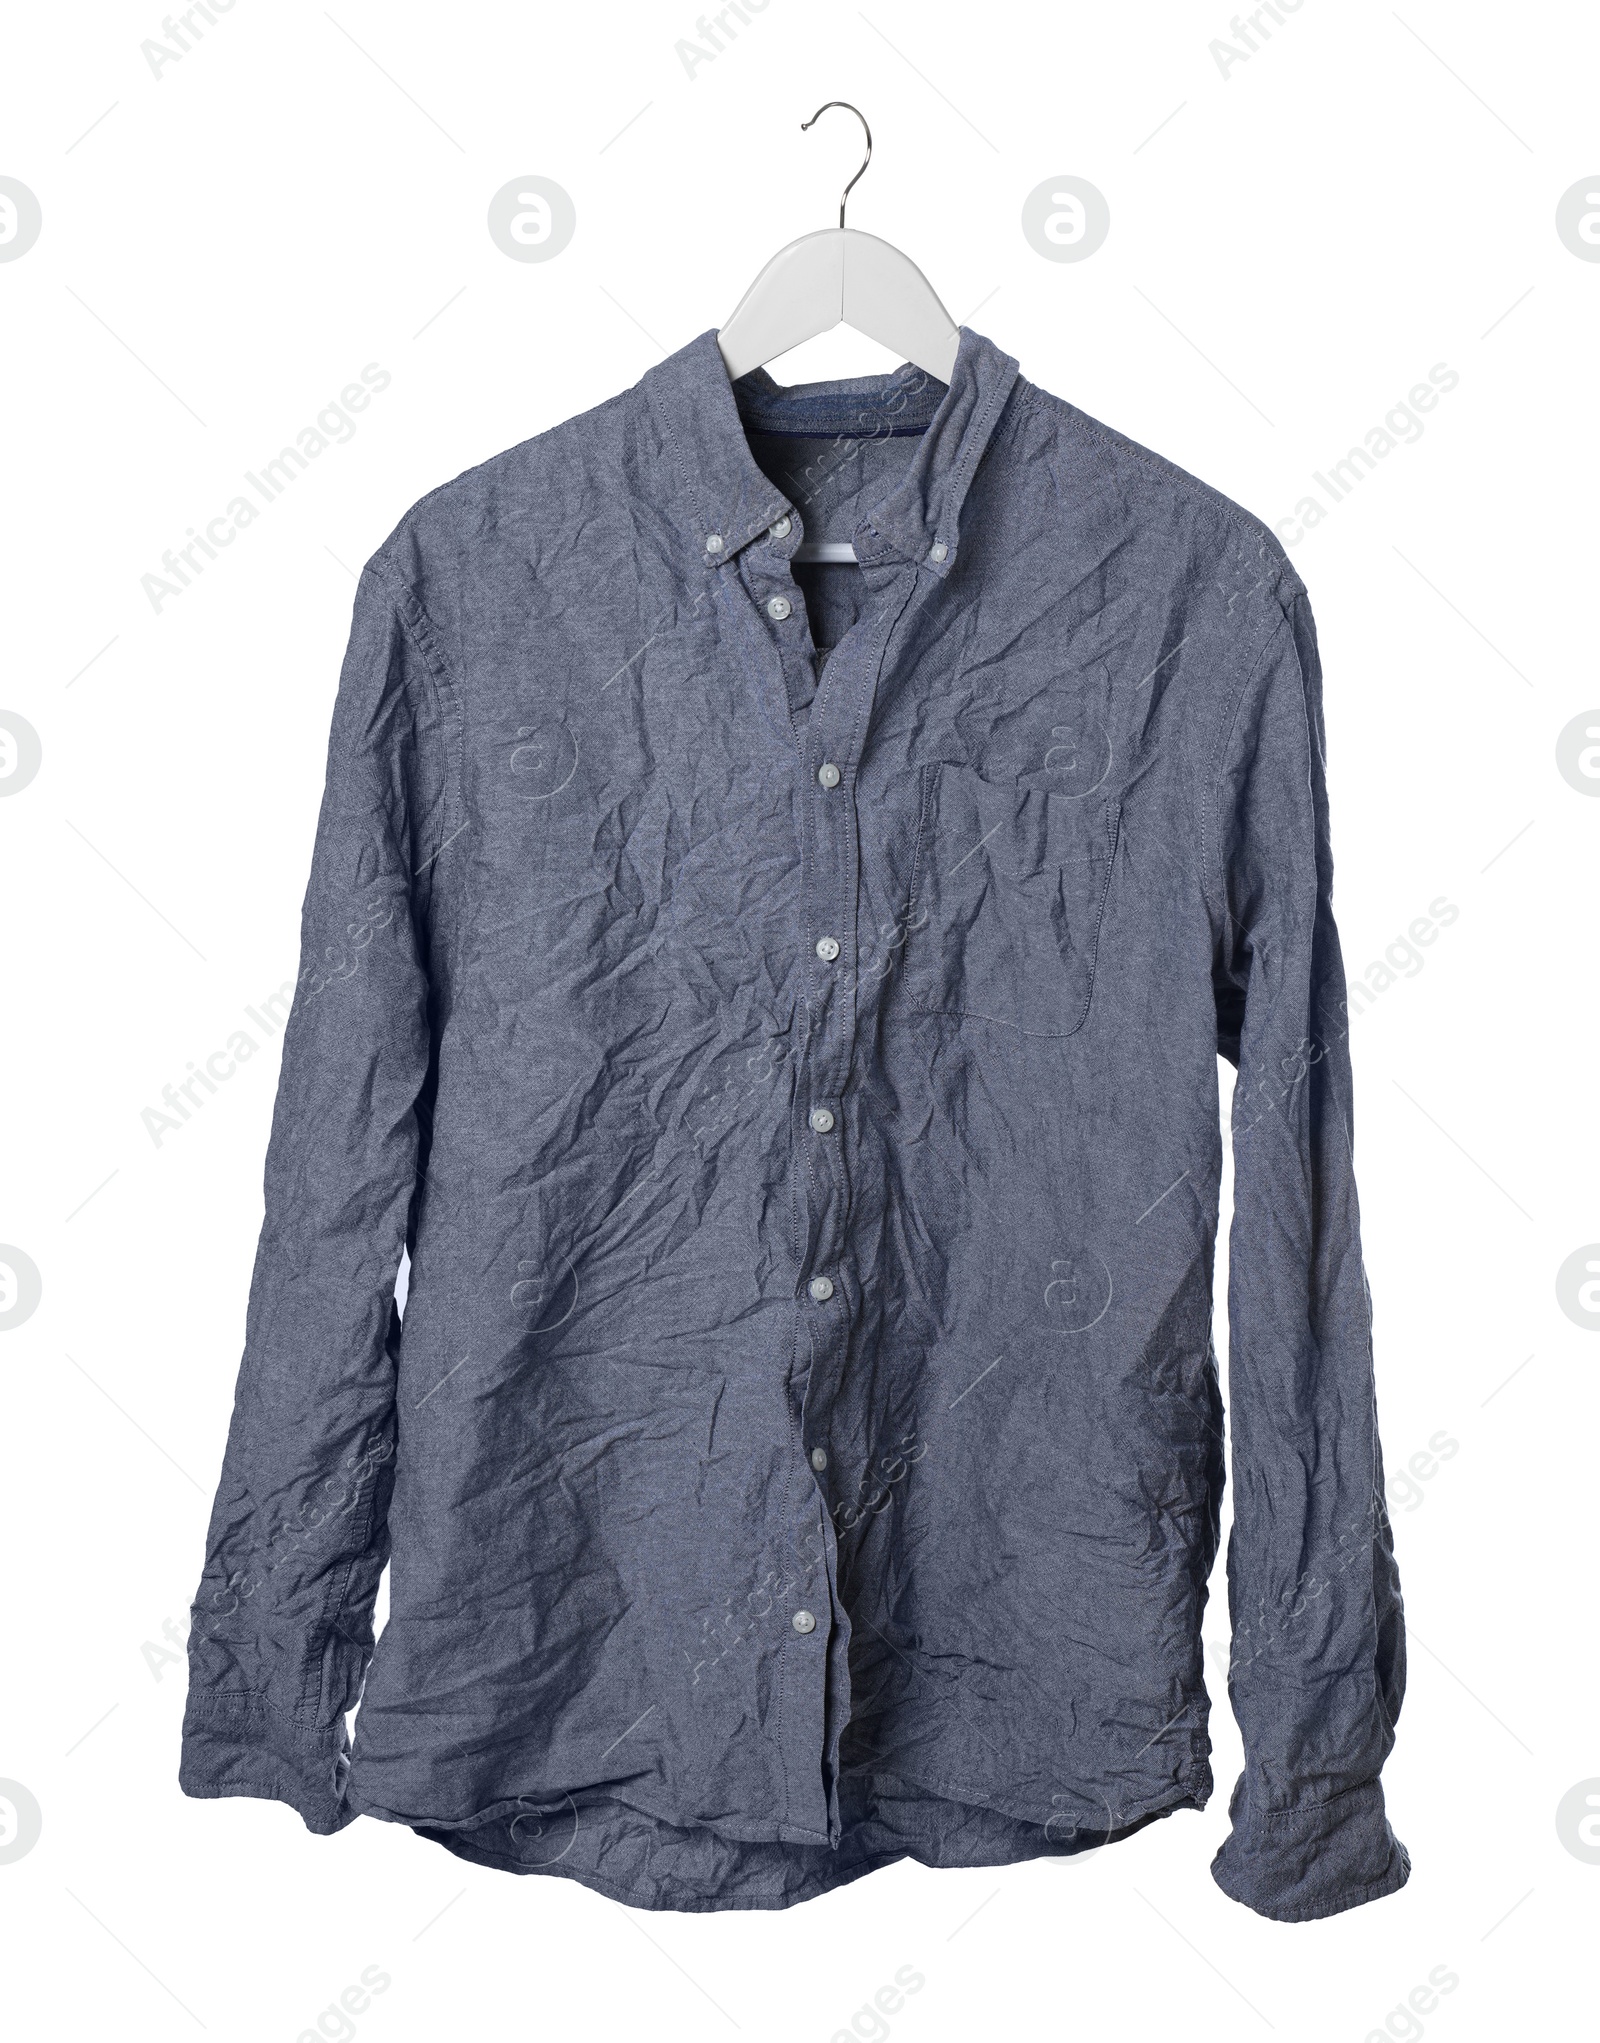 Photo of Hanger with creased shirt isolated on white